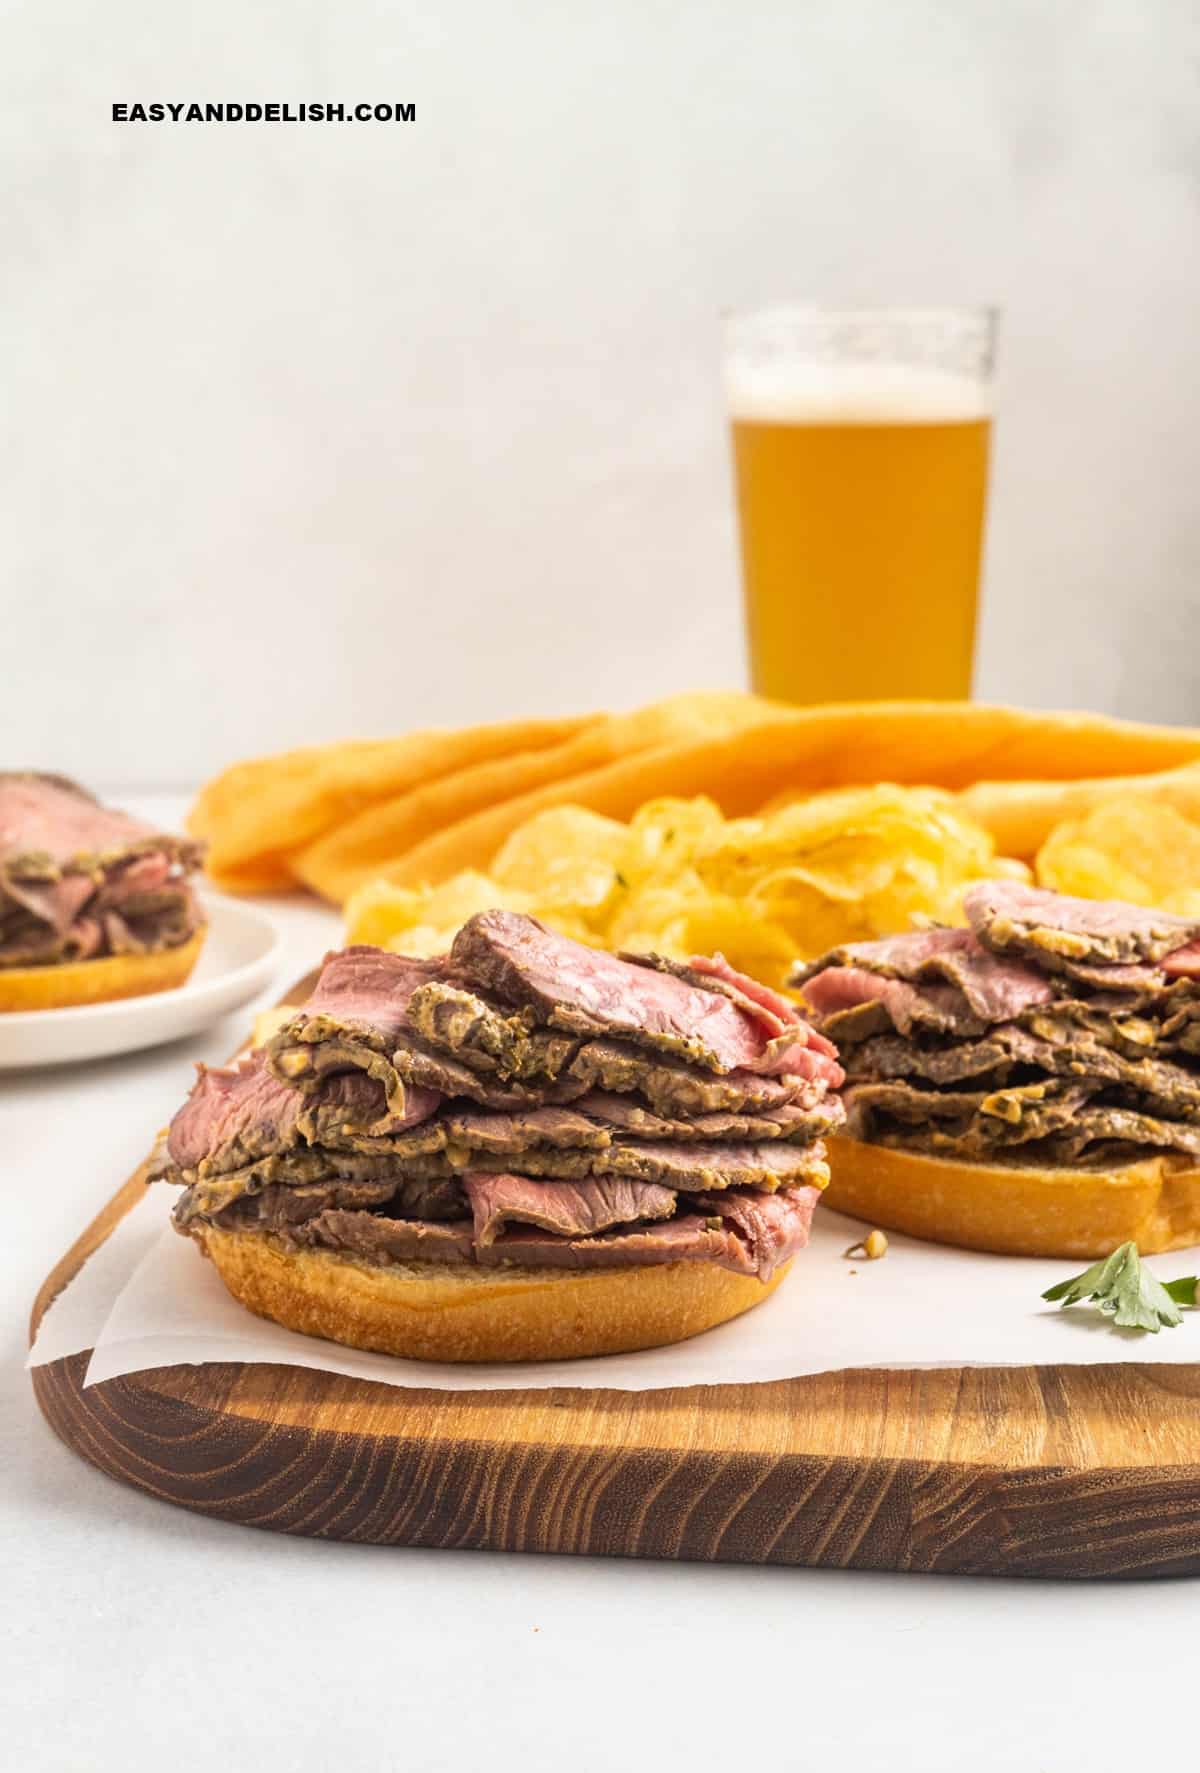 a glass of beer on the background with some roast beef sandwiches being assembled.